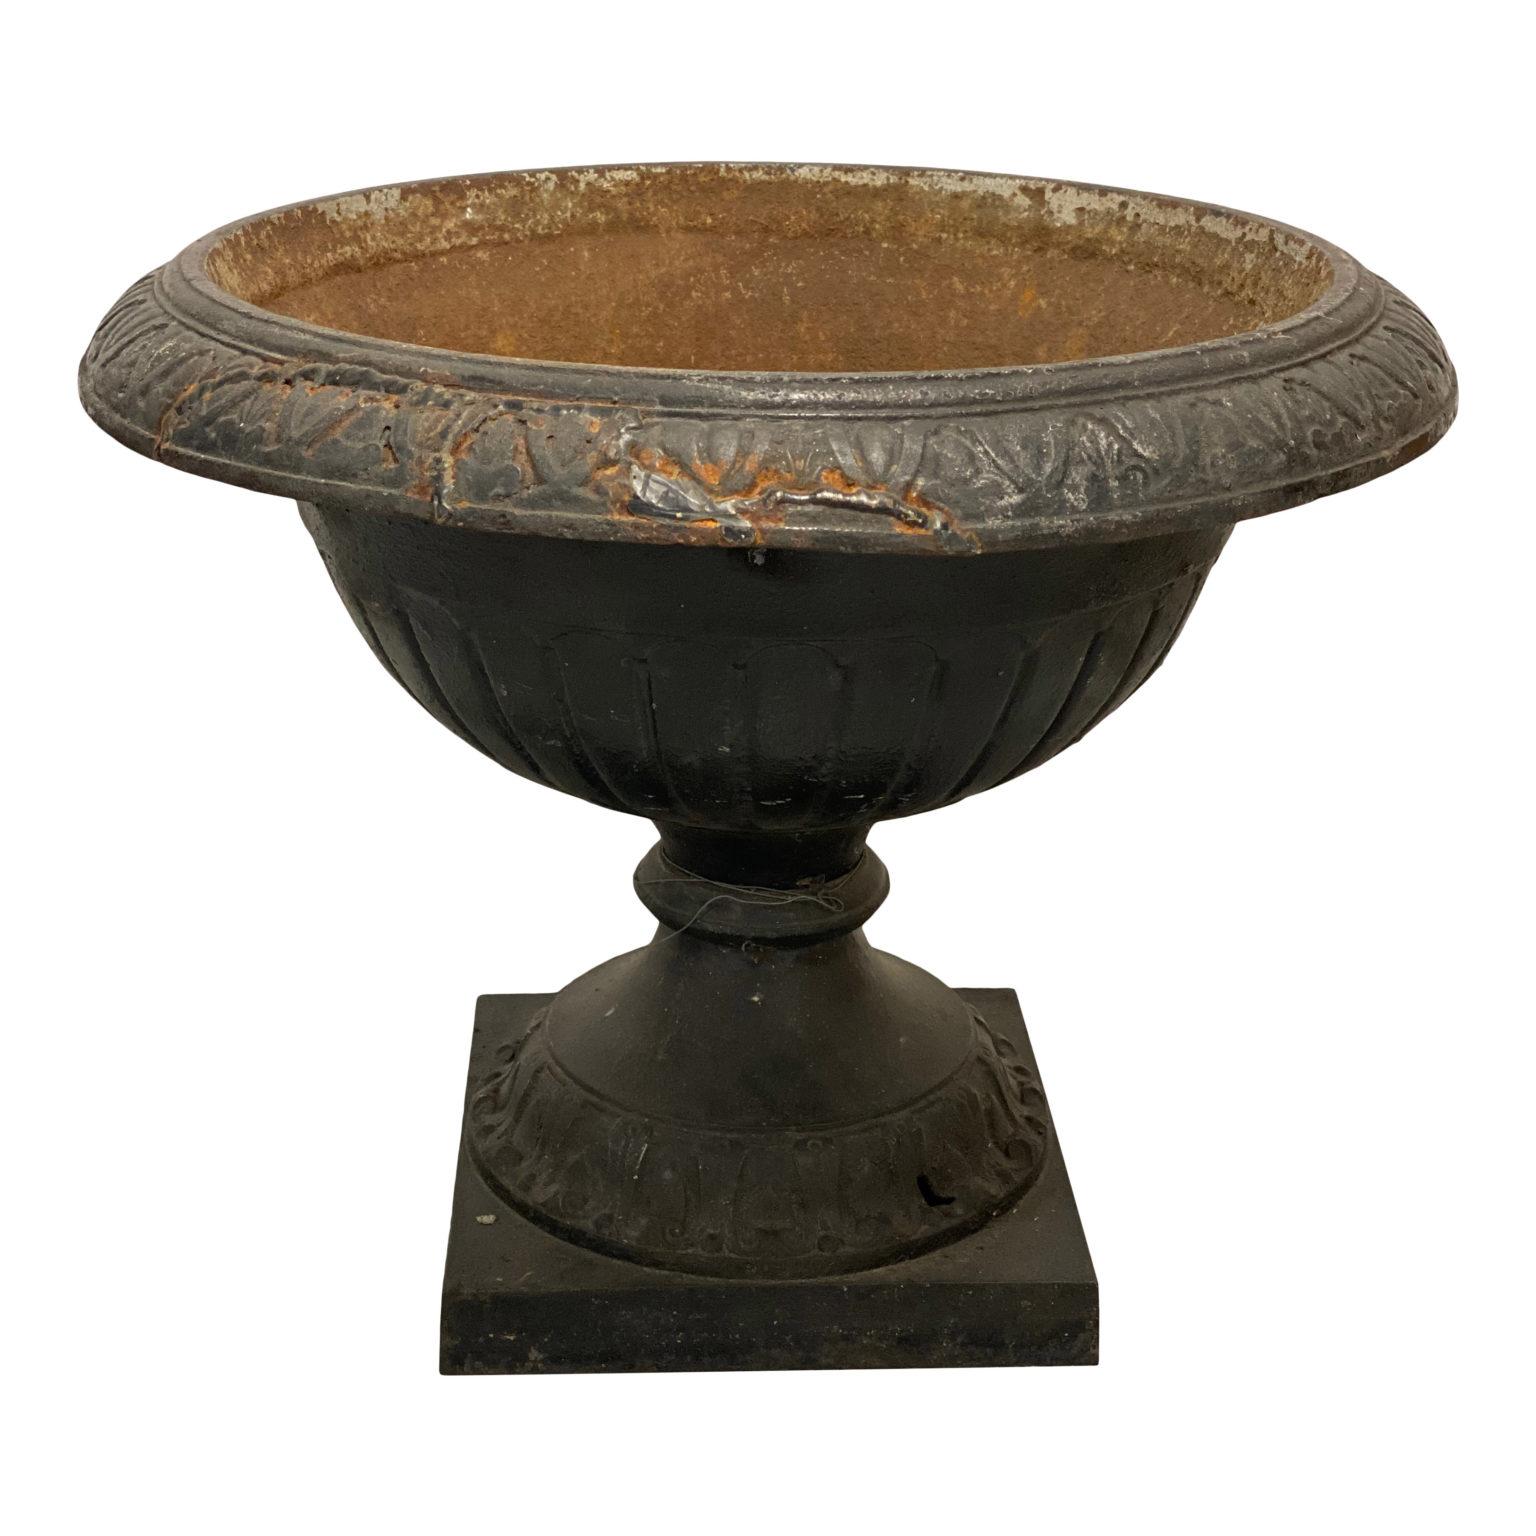 Neoclassical iron urn, aged patina.

20 H x 26.5 Top OAD x 12 Square base.